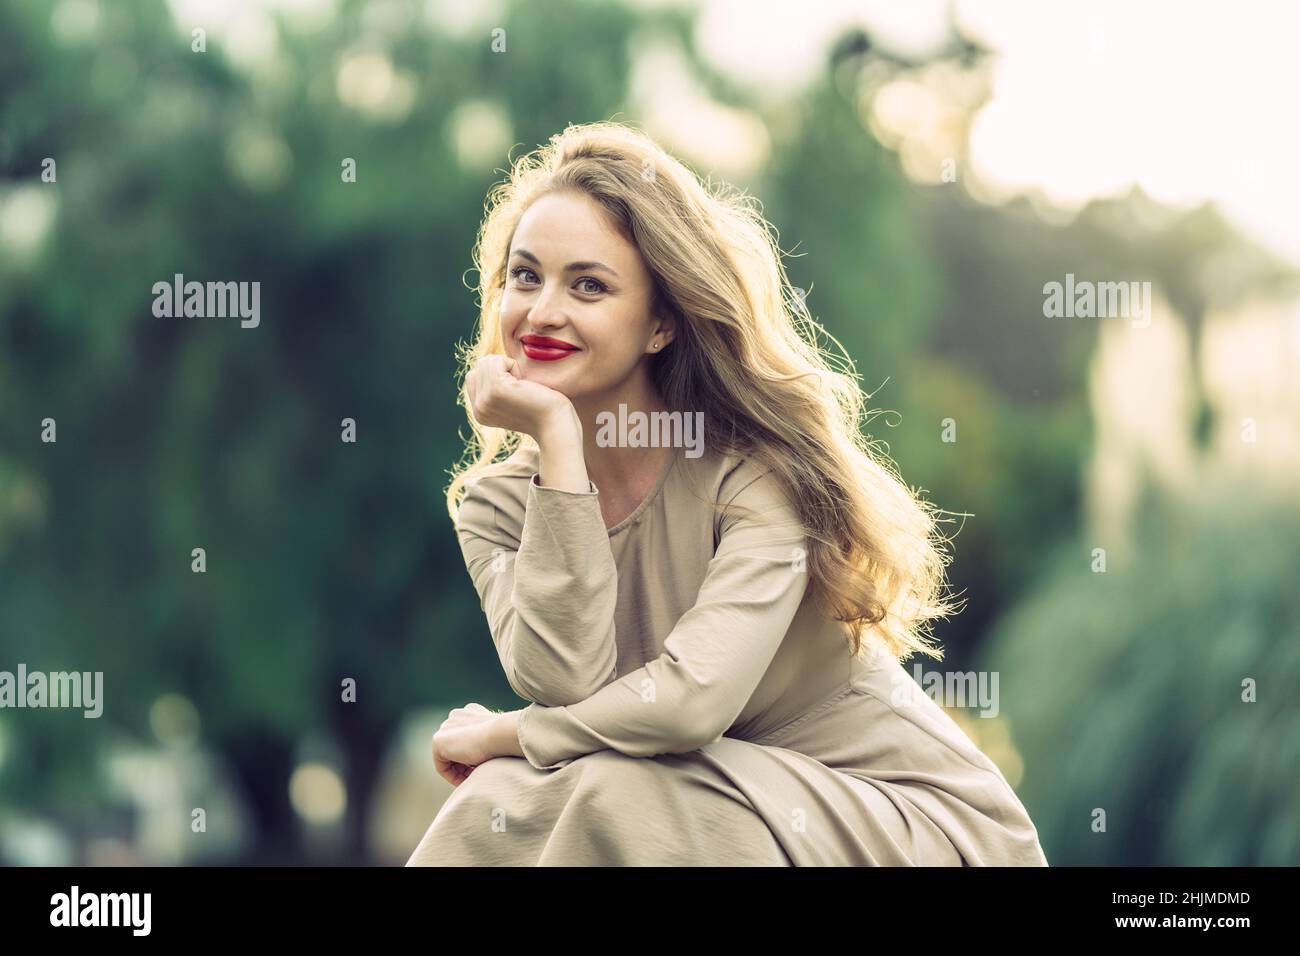 portrait of woman with long blonde hair squatting in a park at sunset Stock Photo